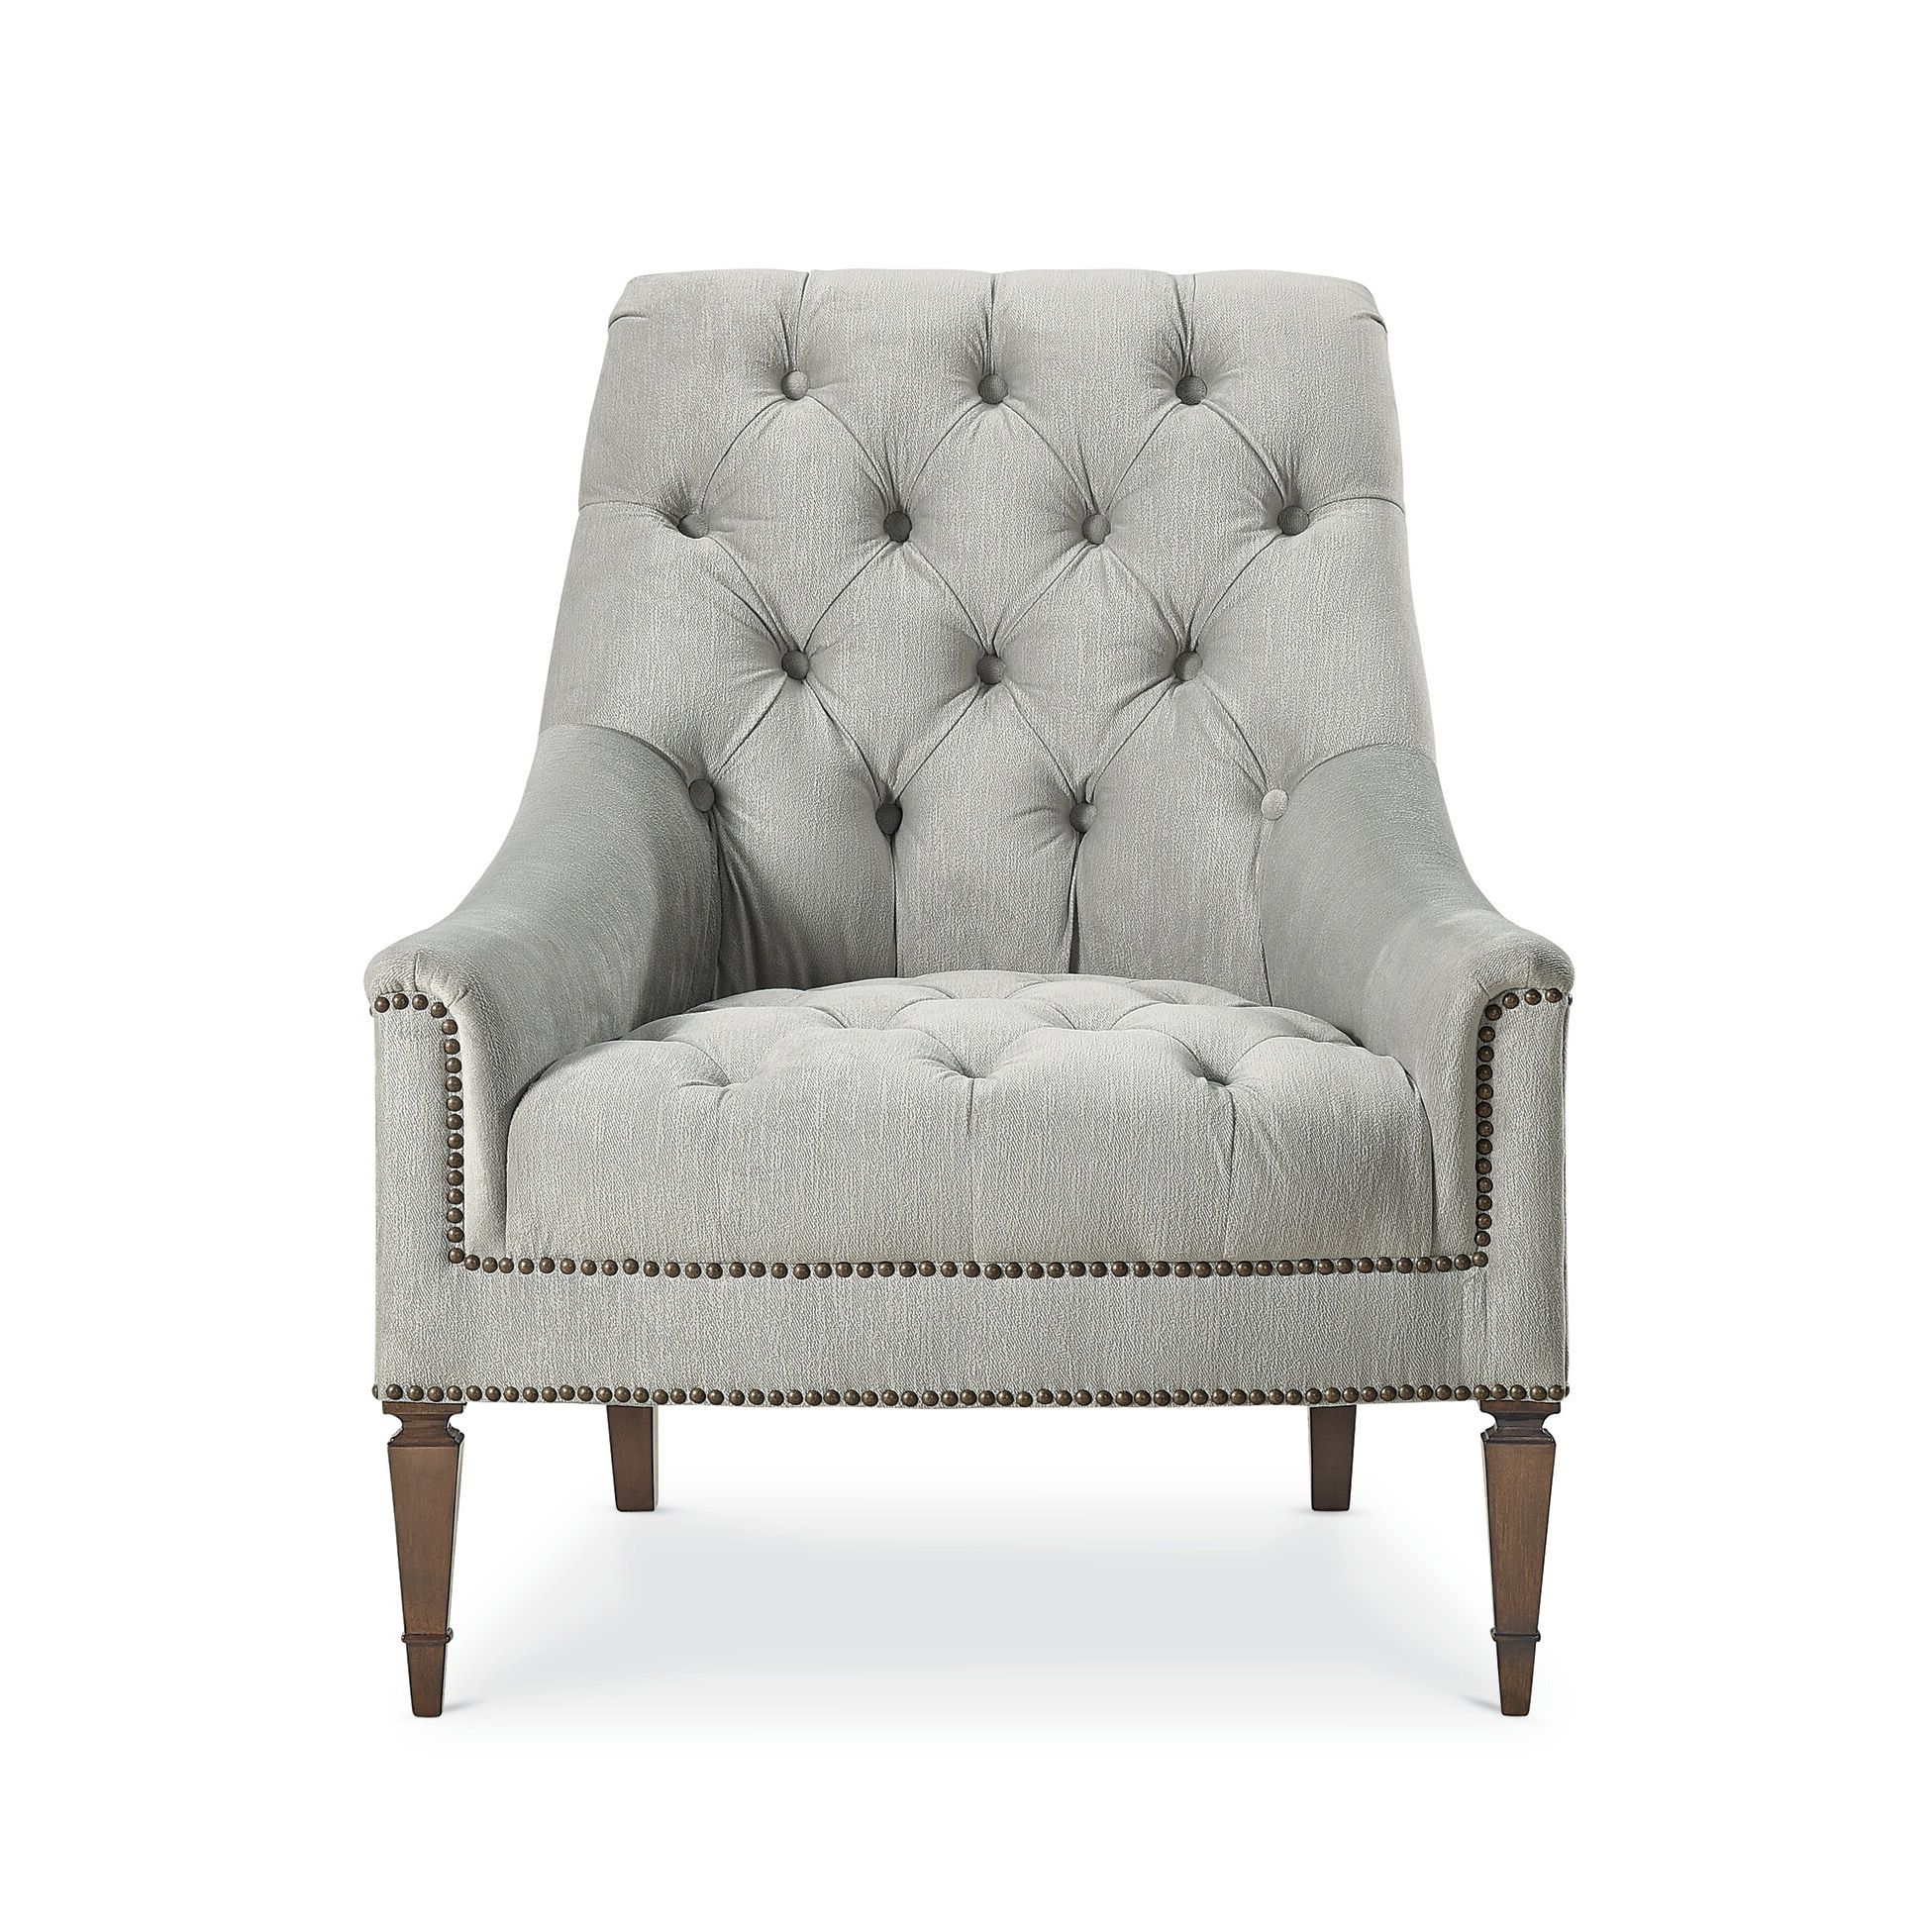 Most Recent Freman Armchair In Pitts Armchairs (View 17 of 20)